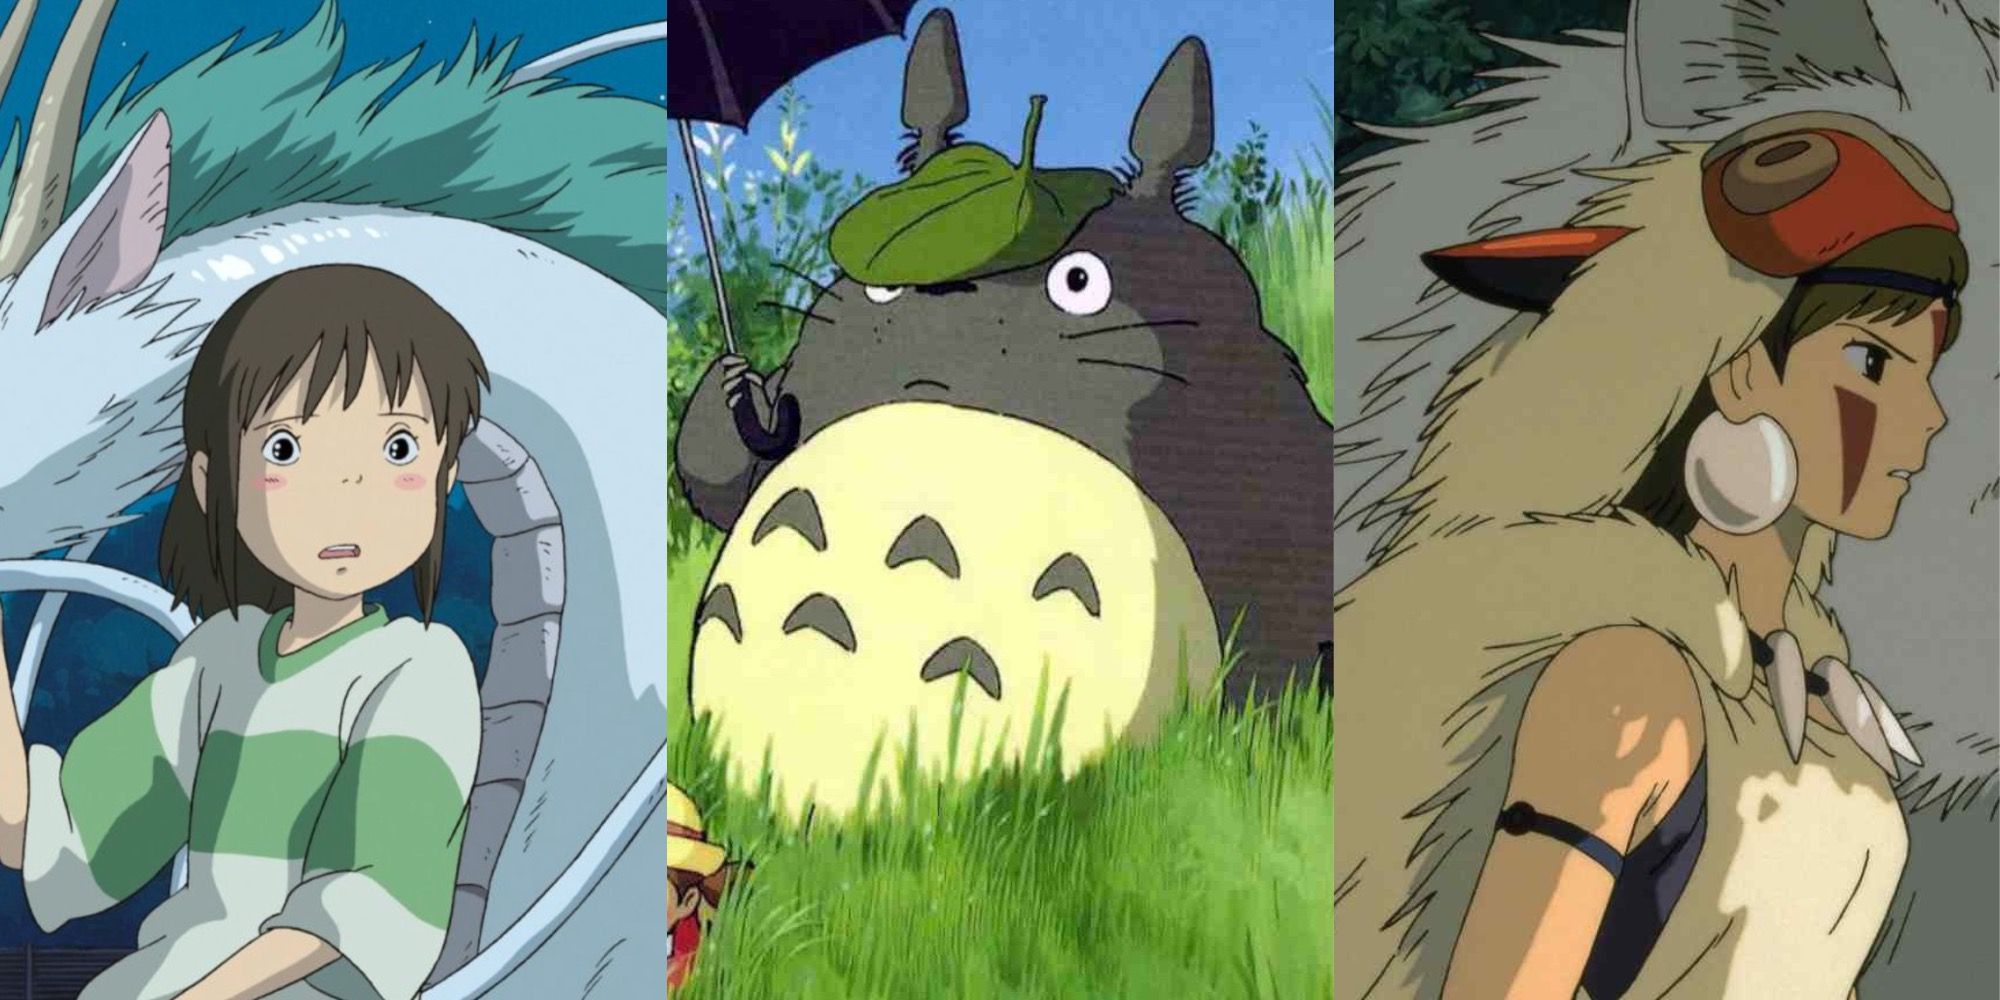 Chihiro, Totoro, and San in their respective Studio Ghibli movies